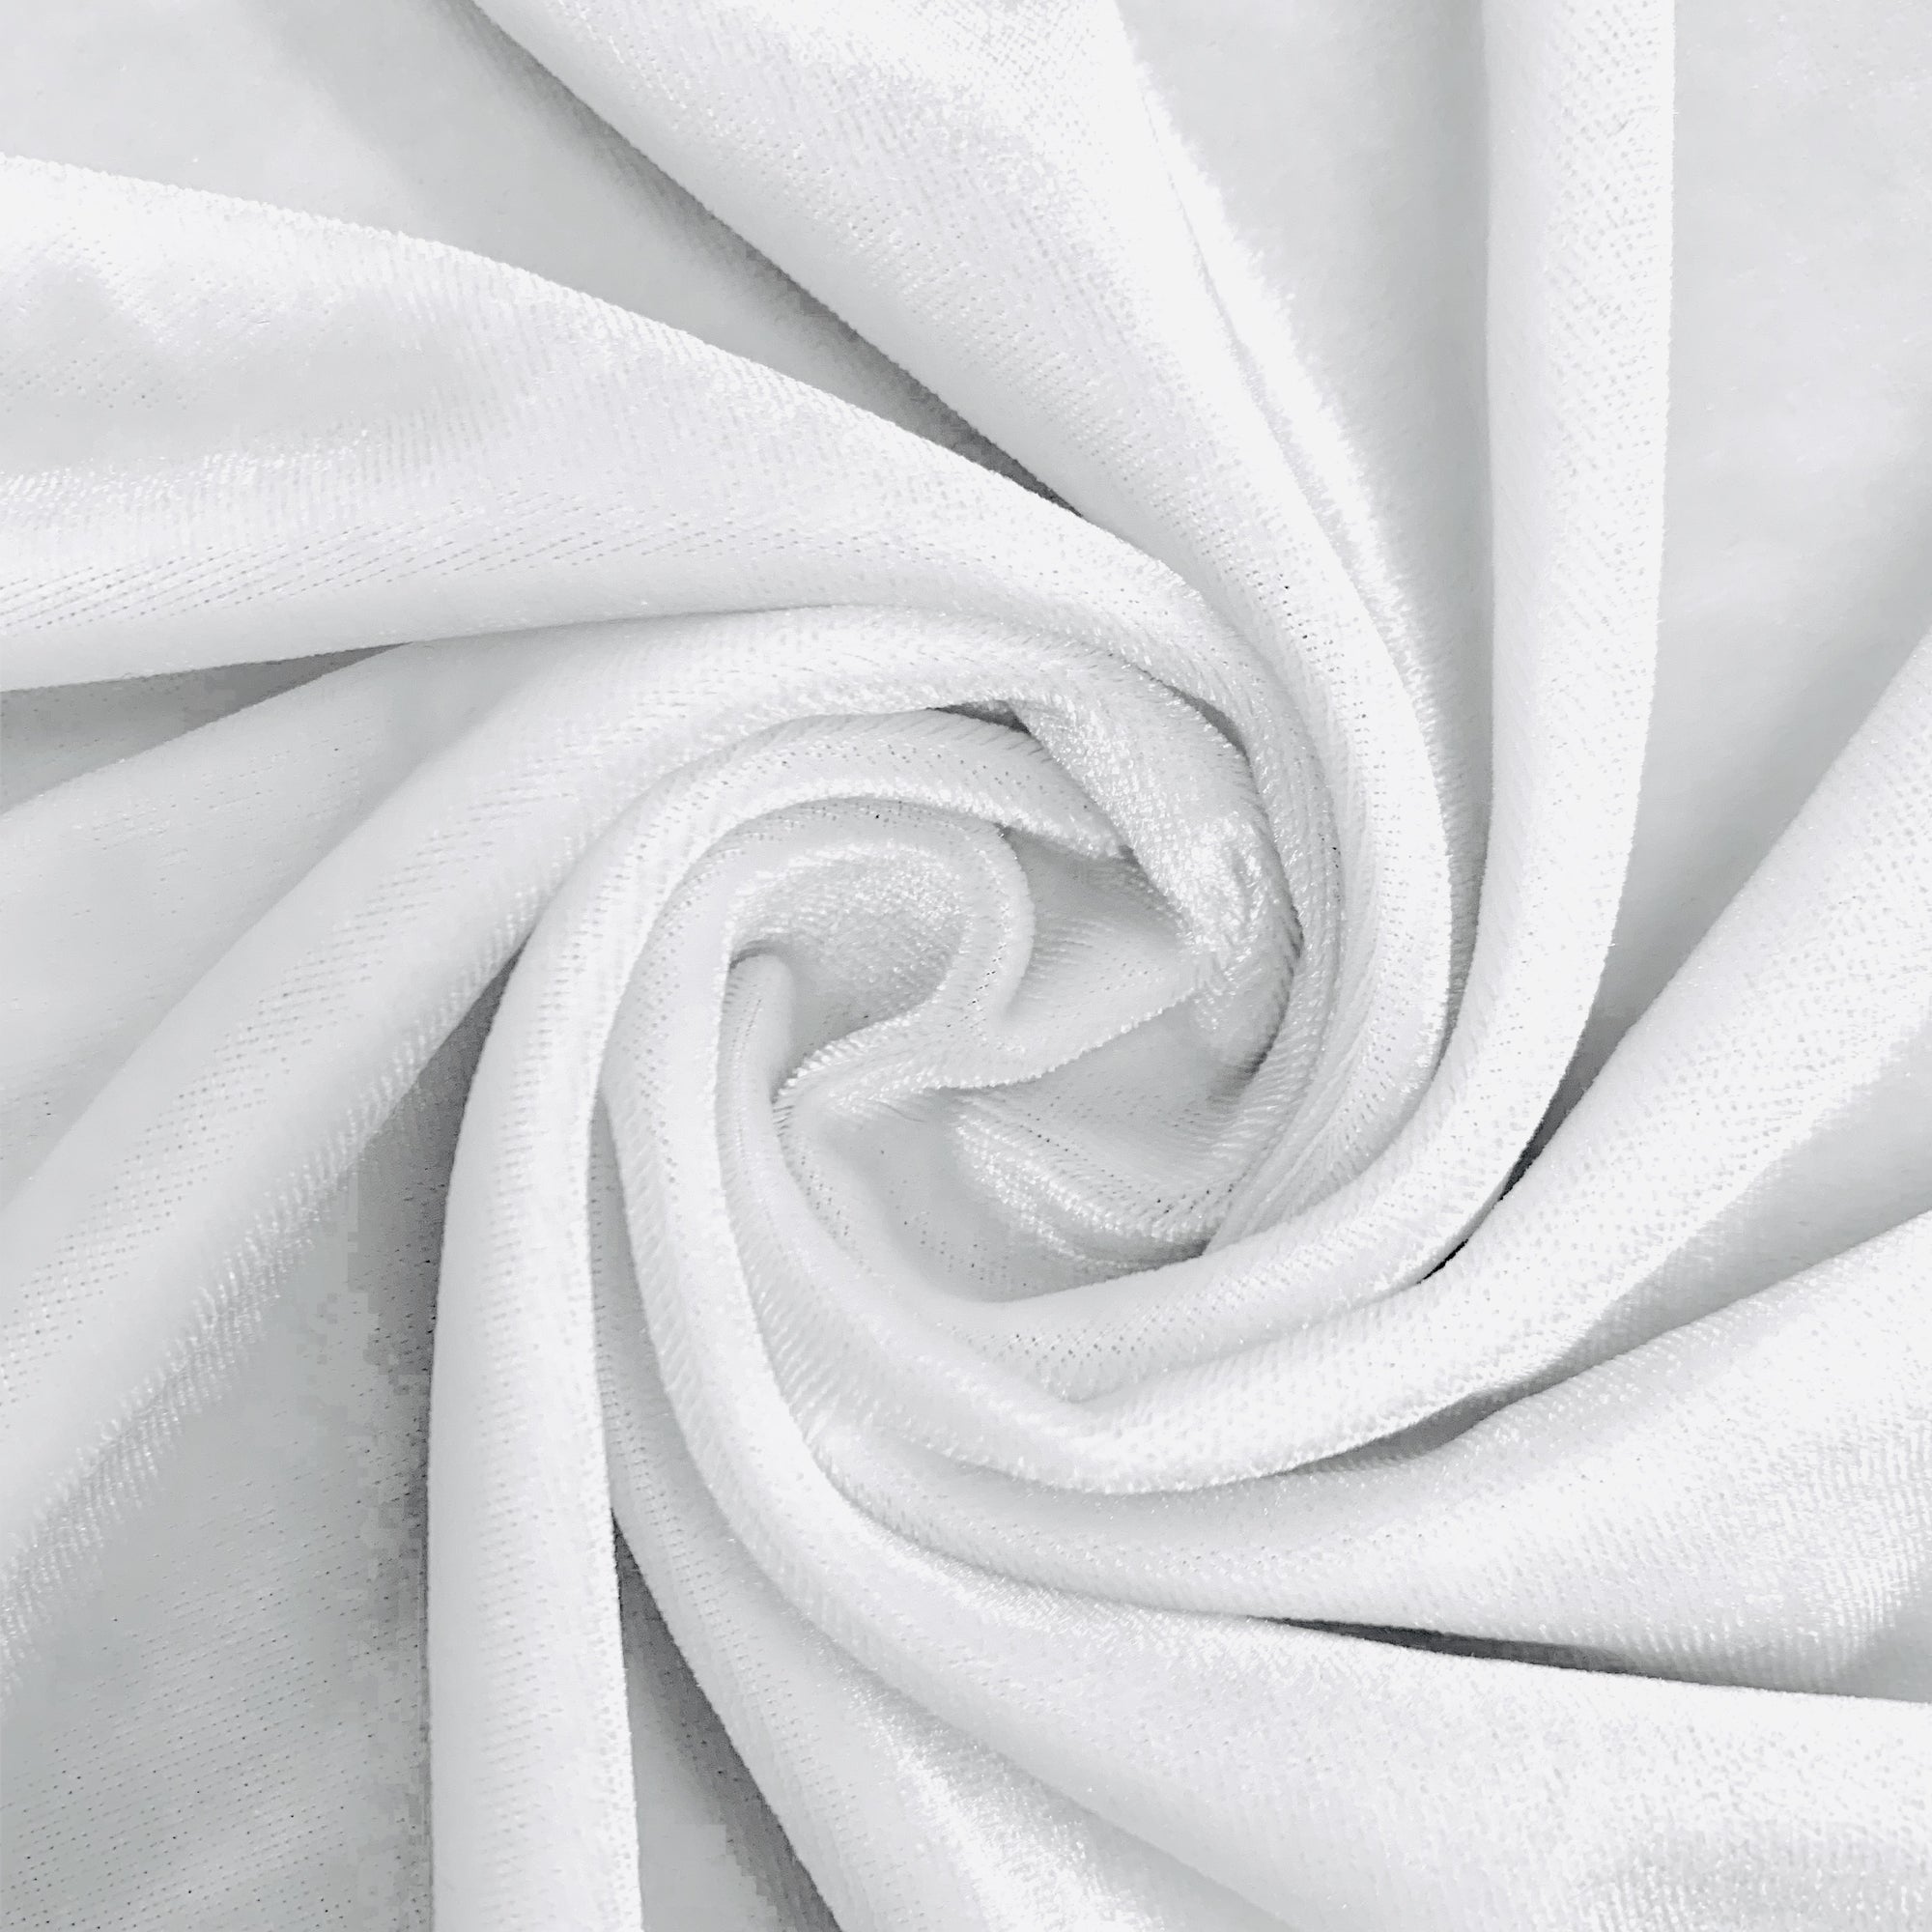 Princess WHITE Polyester Stretch Velvet Fabric for Bows, Top Knots, Head Wraps, Scrunchies, Clothes, Costumes, Crafts